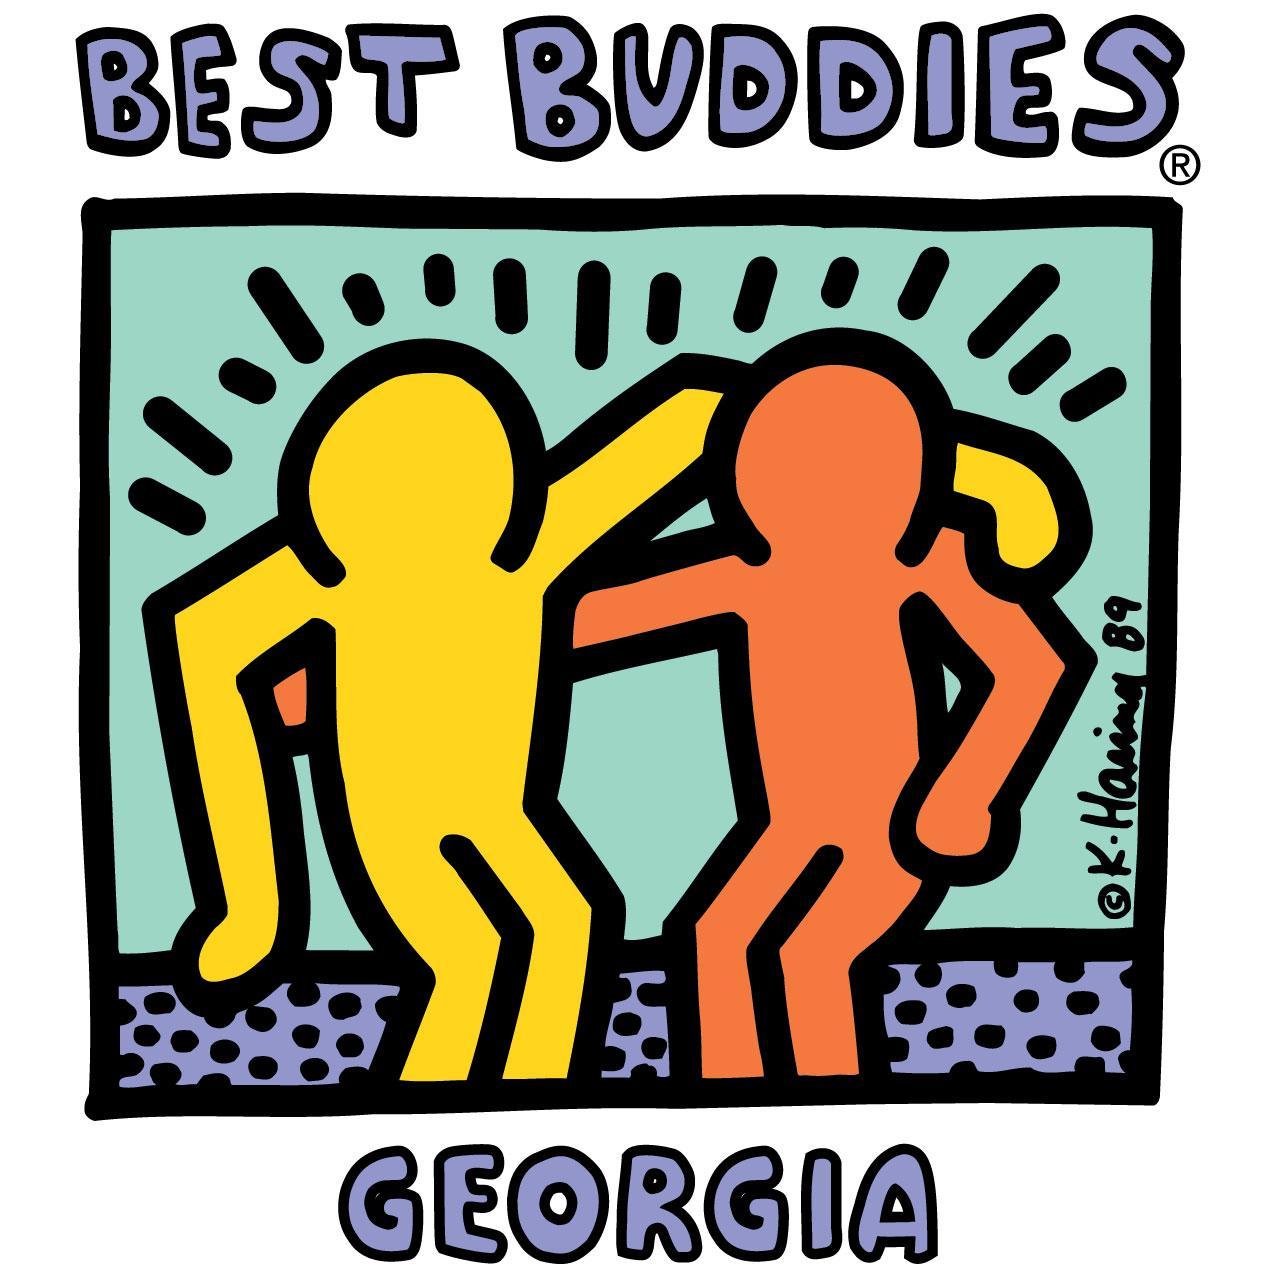 Creating communities of inclusion through friendship, employment, & leadership development. Join our global movement! #BestBuddies